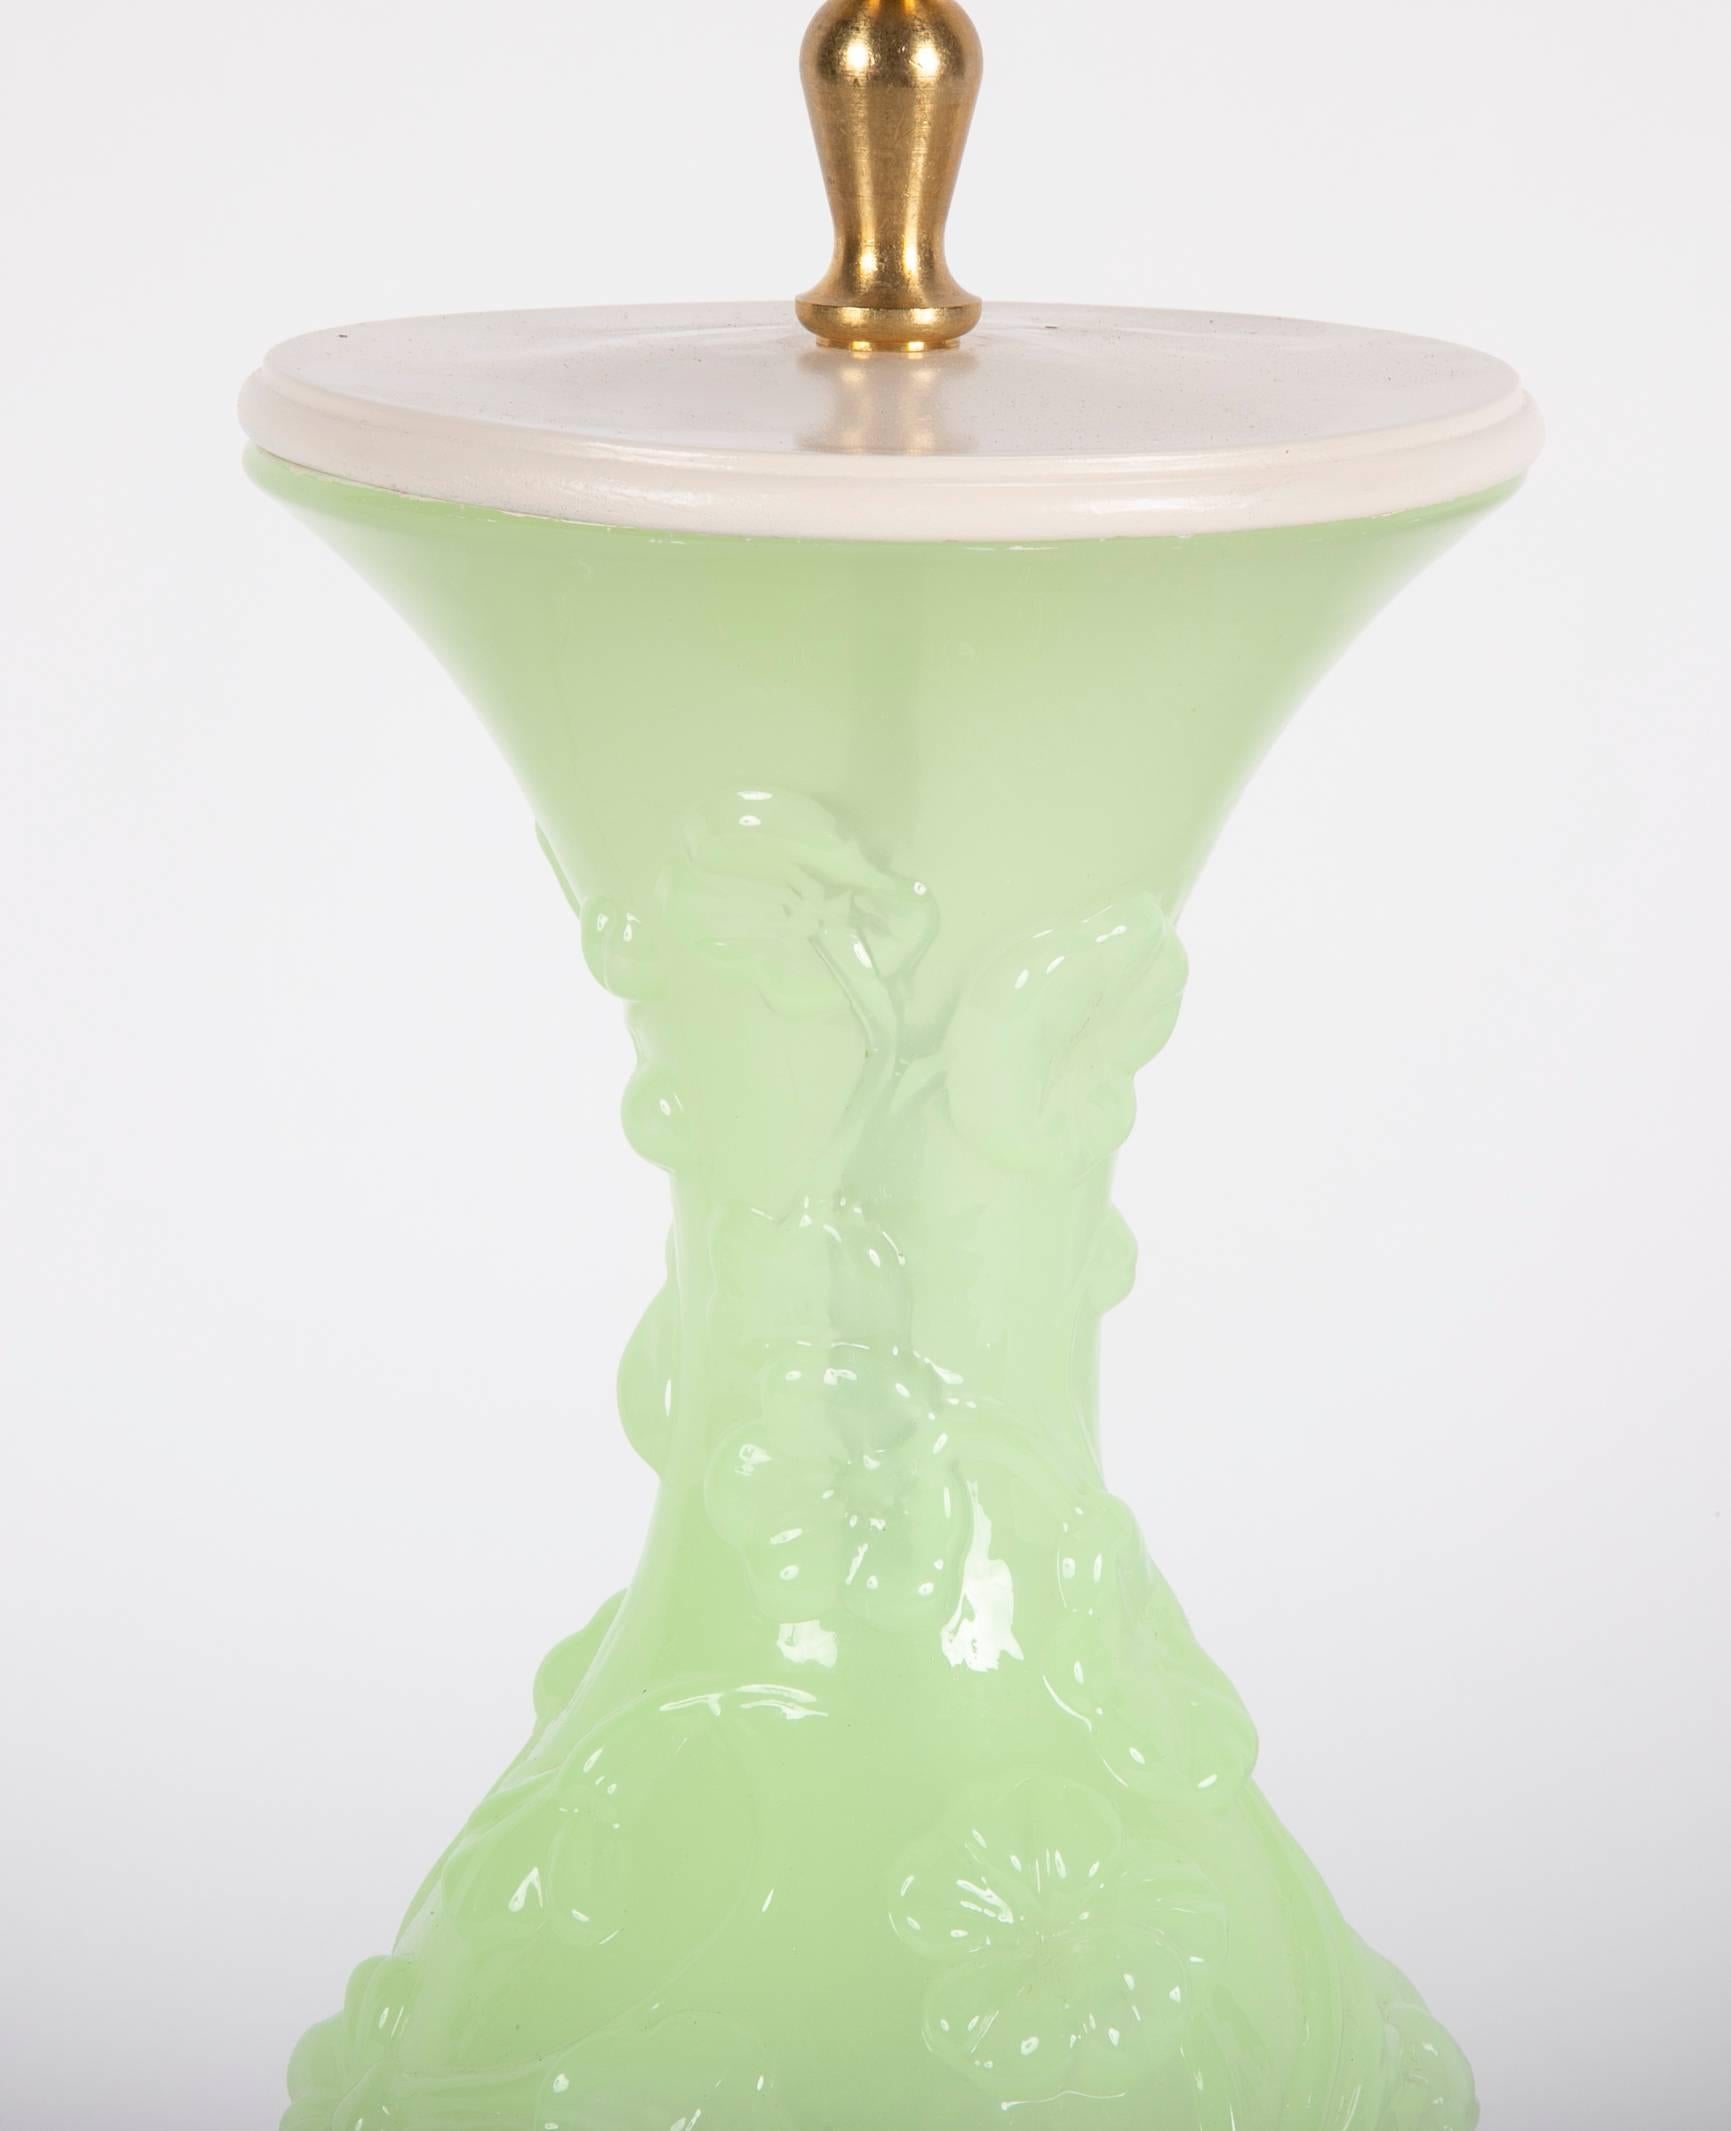 American Pressed Glass Vases now Table Lamps For Sale 5